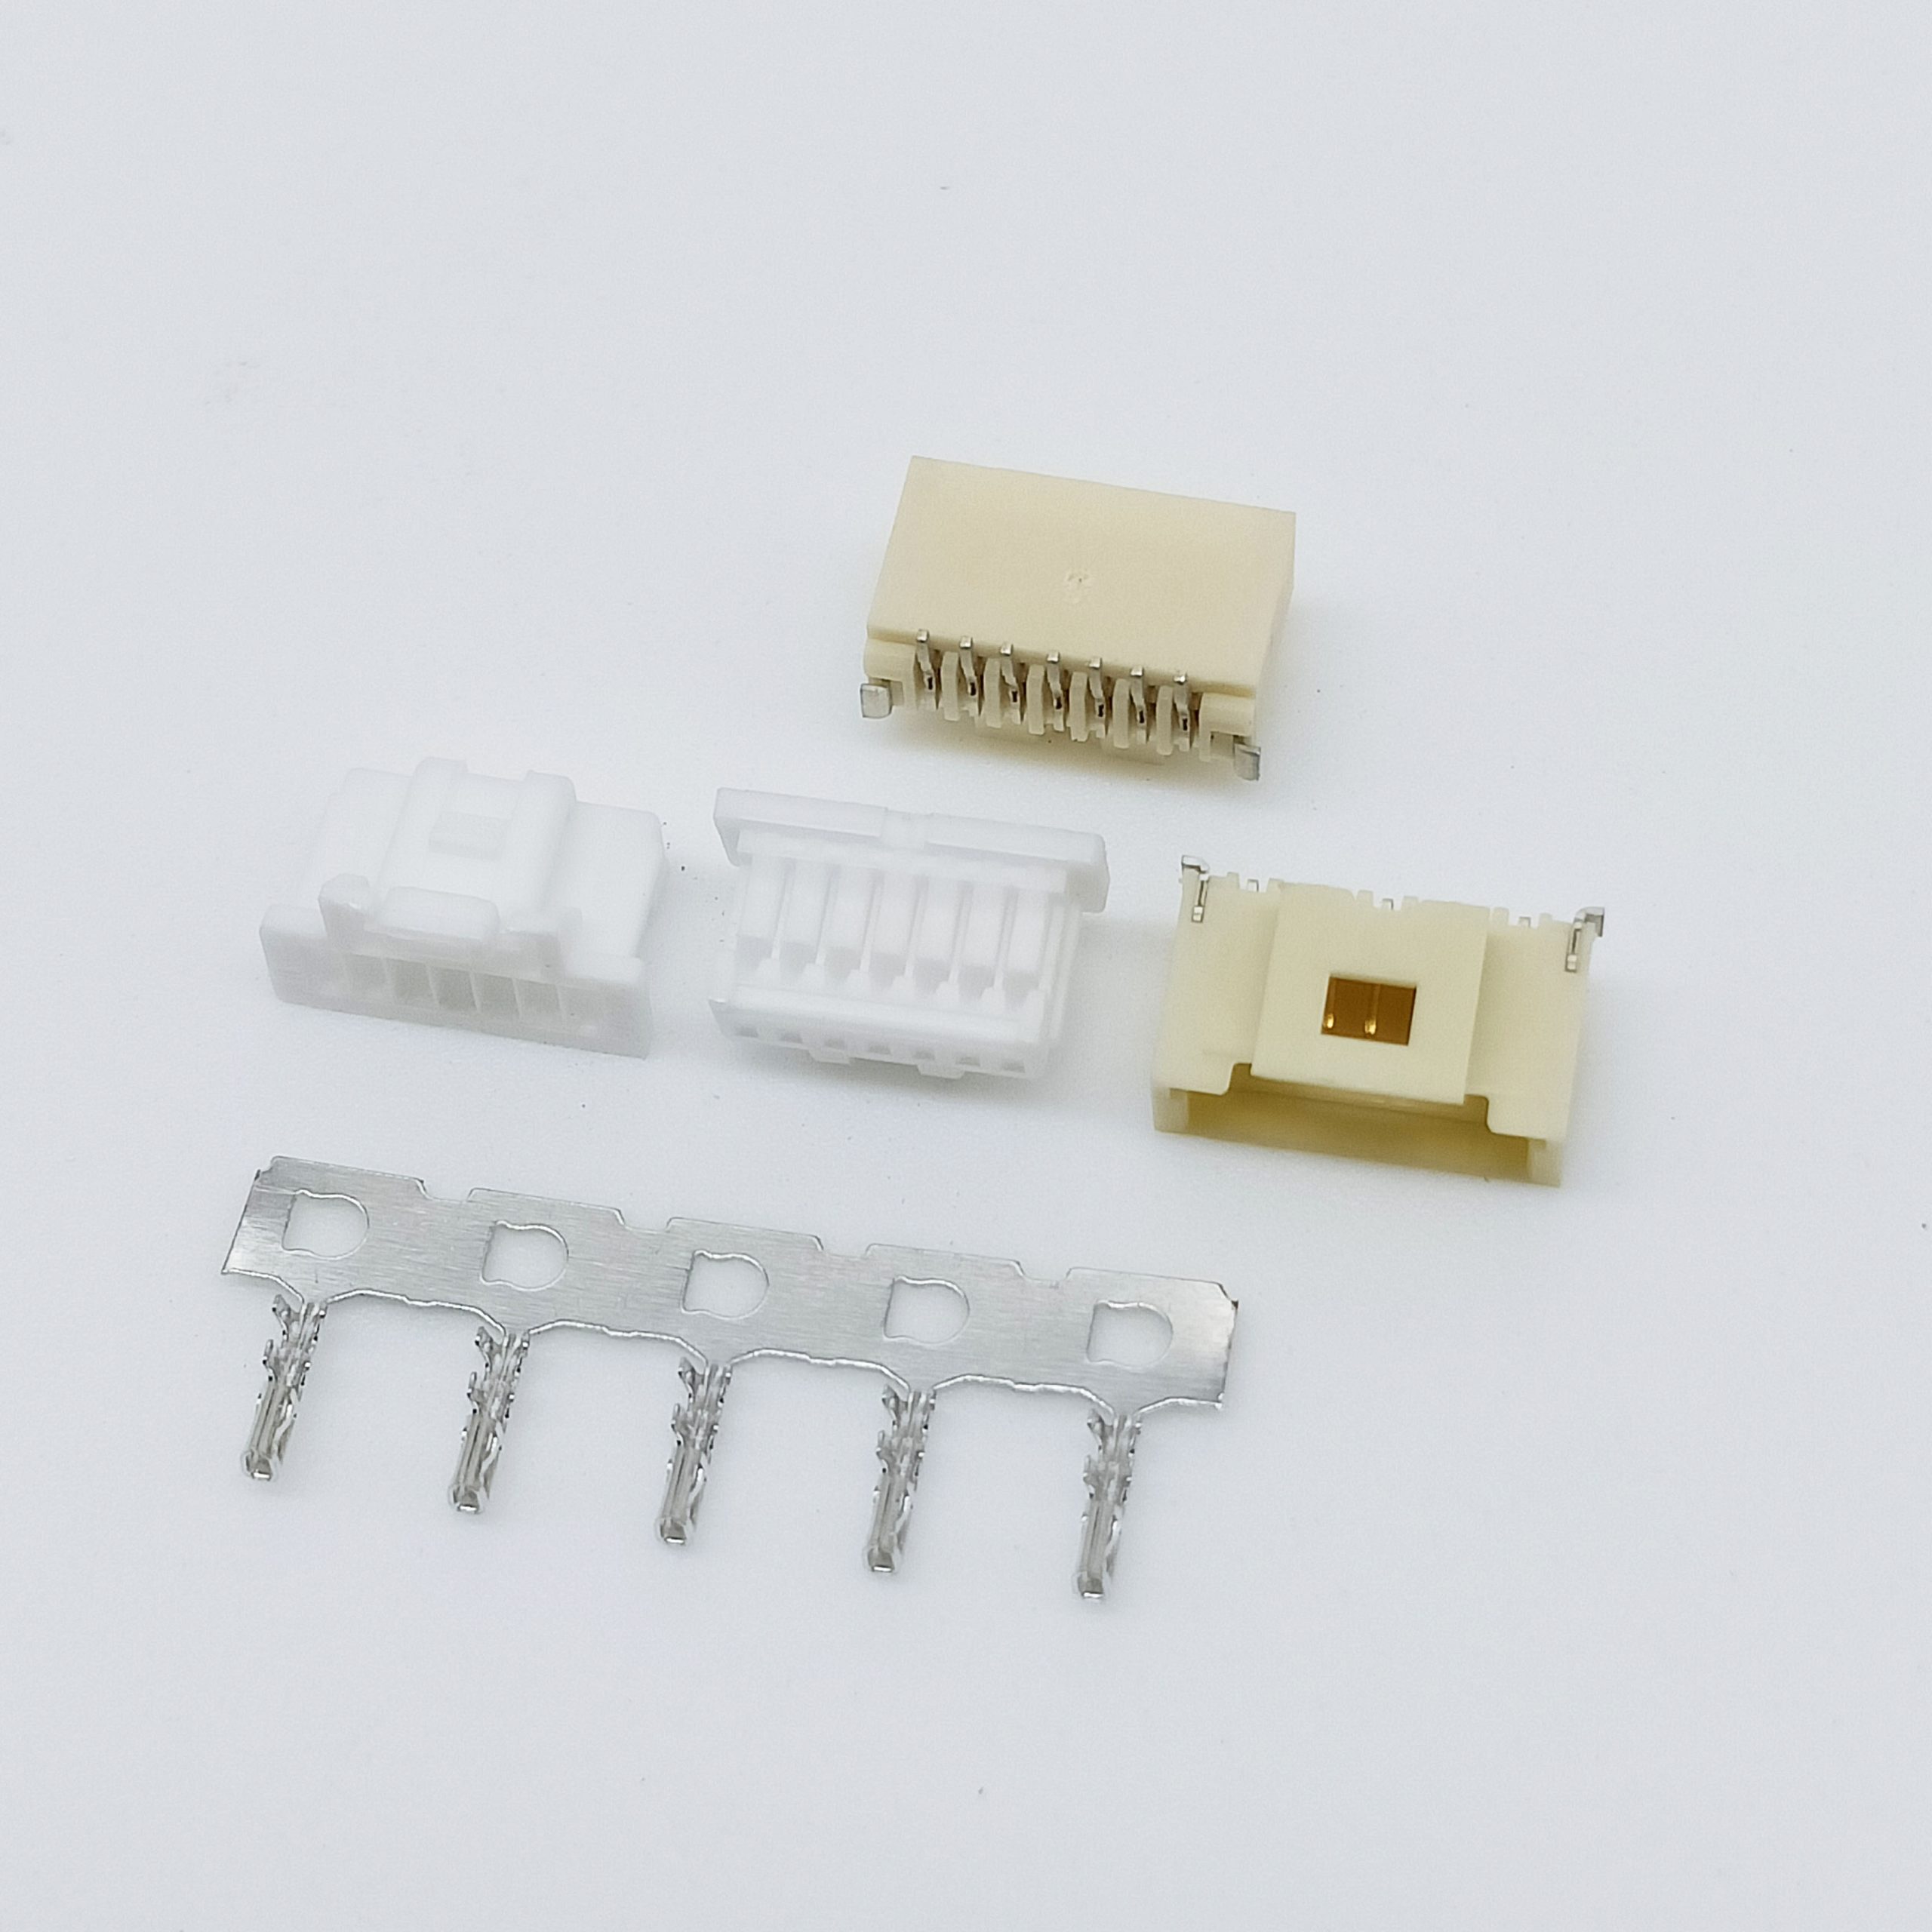 Molex PicoClasp is a reliable, compact connector, celebrated for its secure connections. It finds extensive use in various electronic applications, guaranteeing consistent performance and durability